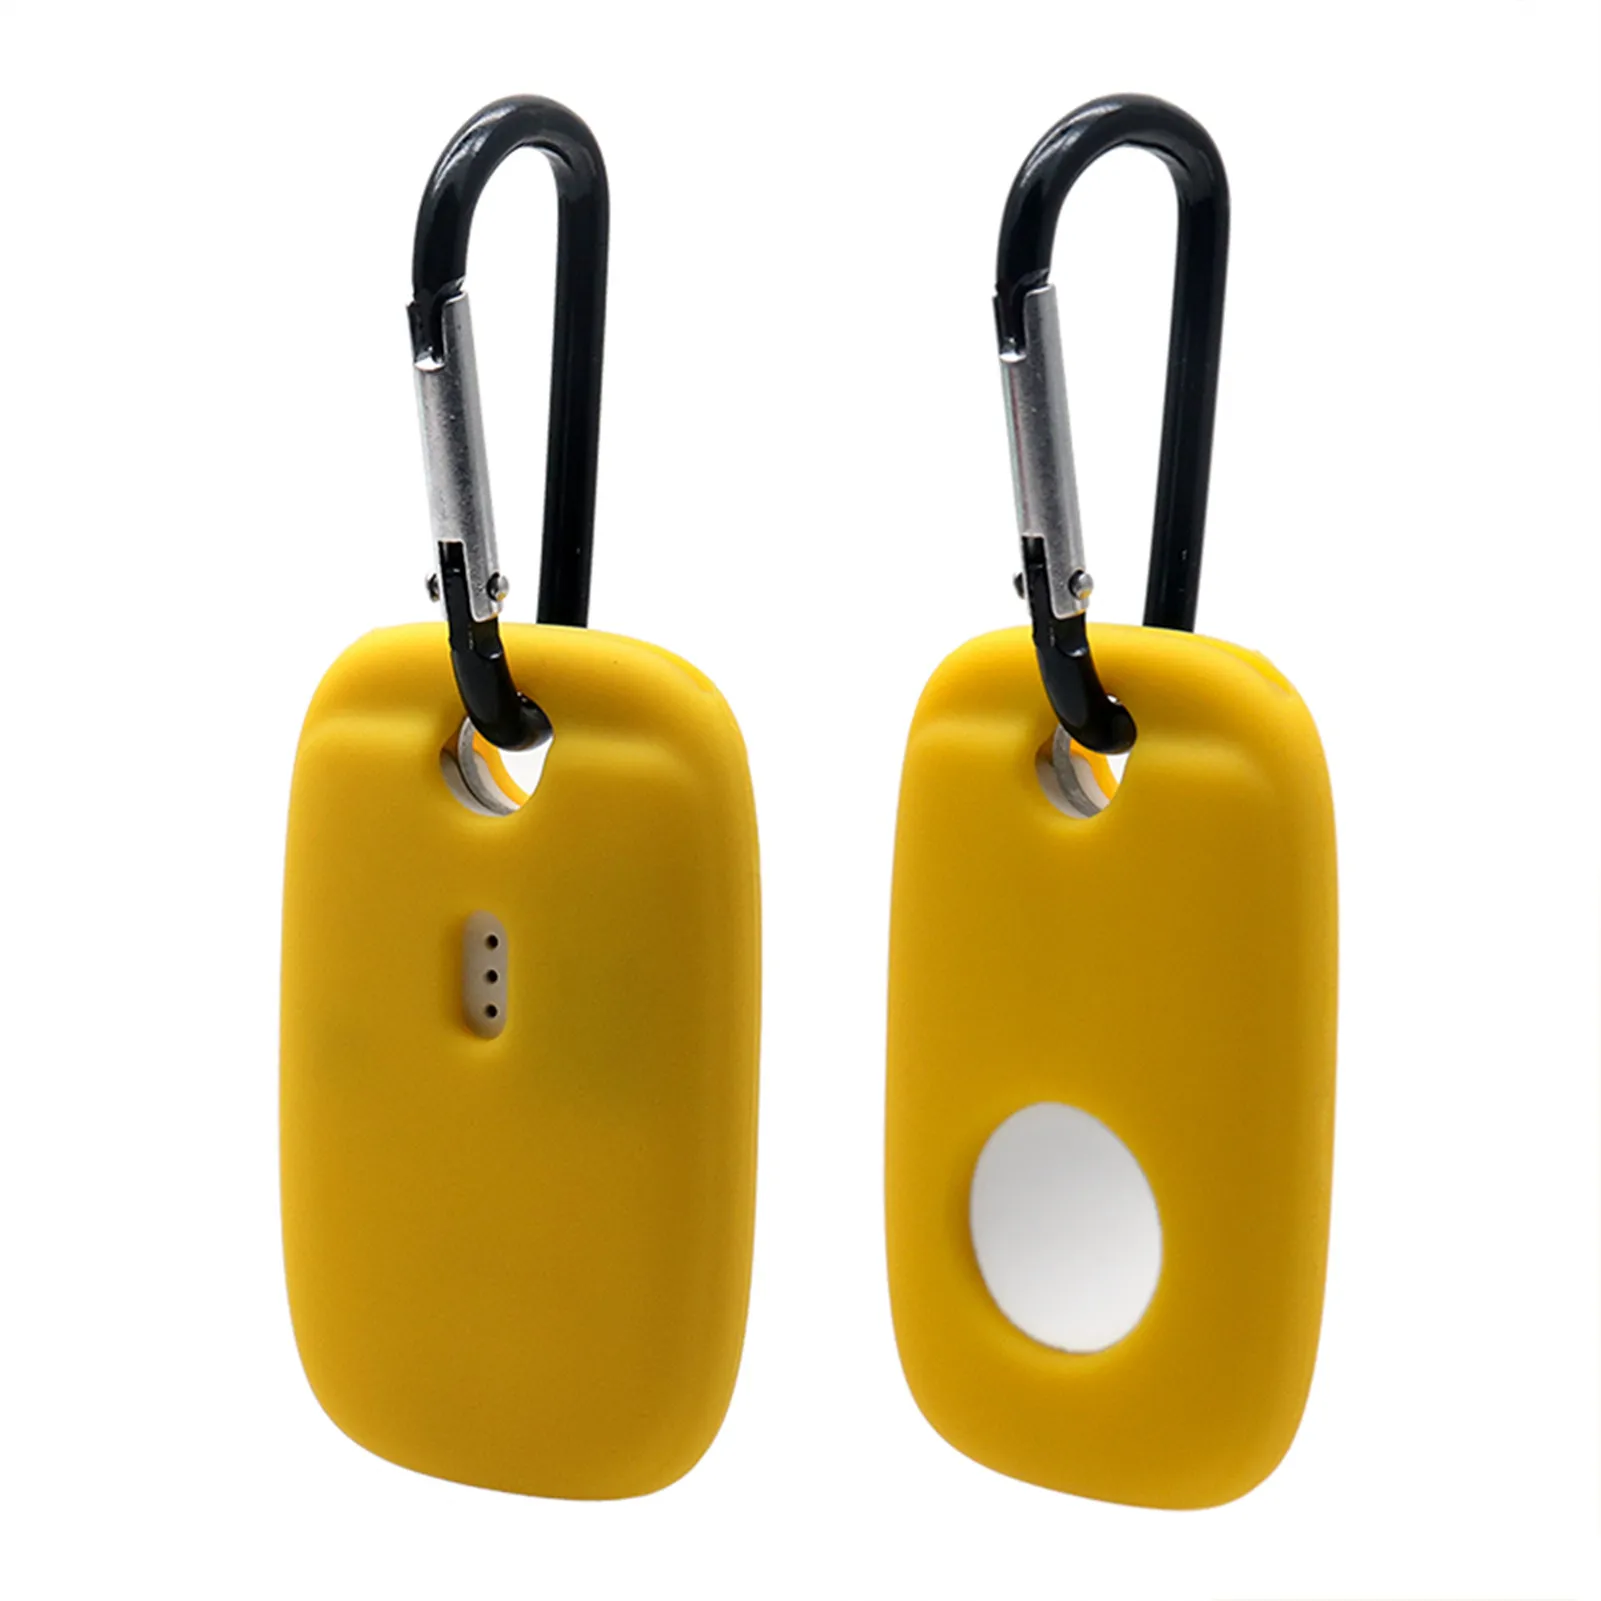 2PCS Tile Pro (2022) Smart Tracker Key Finder Case Storage Anti-Lost Blutooth Scratch Proof Silicone Case Key Finder Protective 